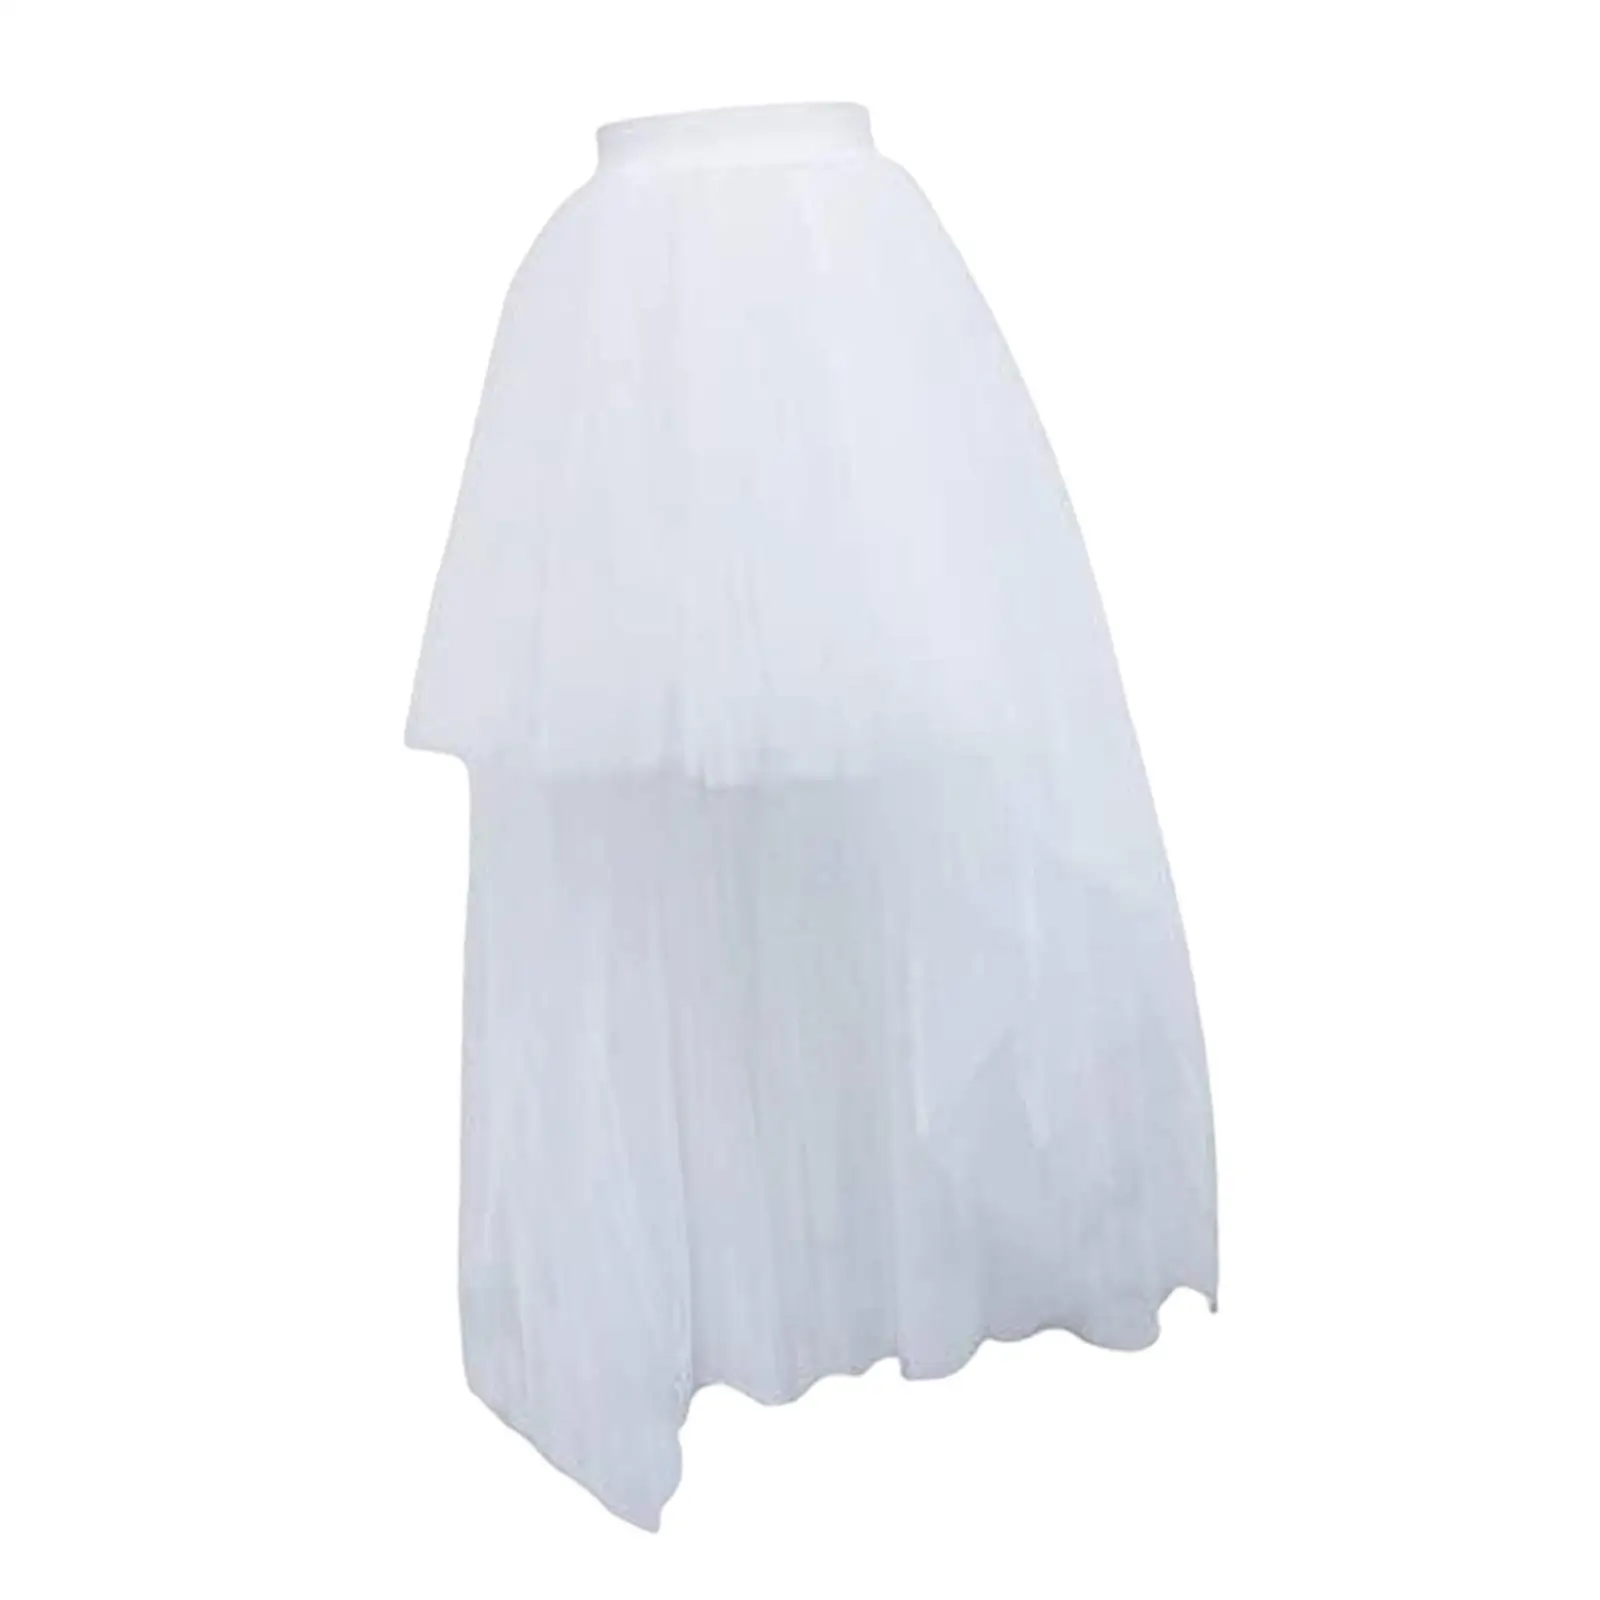 Women High Low Tutu Skirts Swallowtail Skirt Dress Tulle Skirt for Photo Prop Dress up Bridal Shower Formal Stage Performance